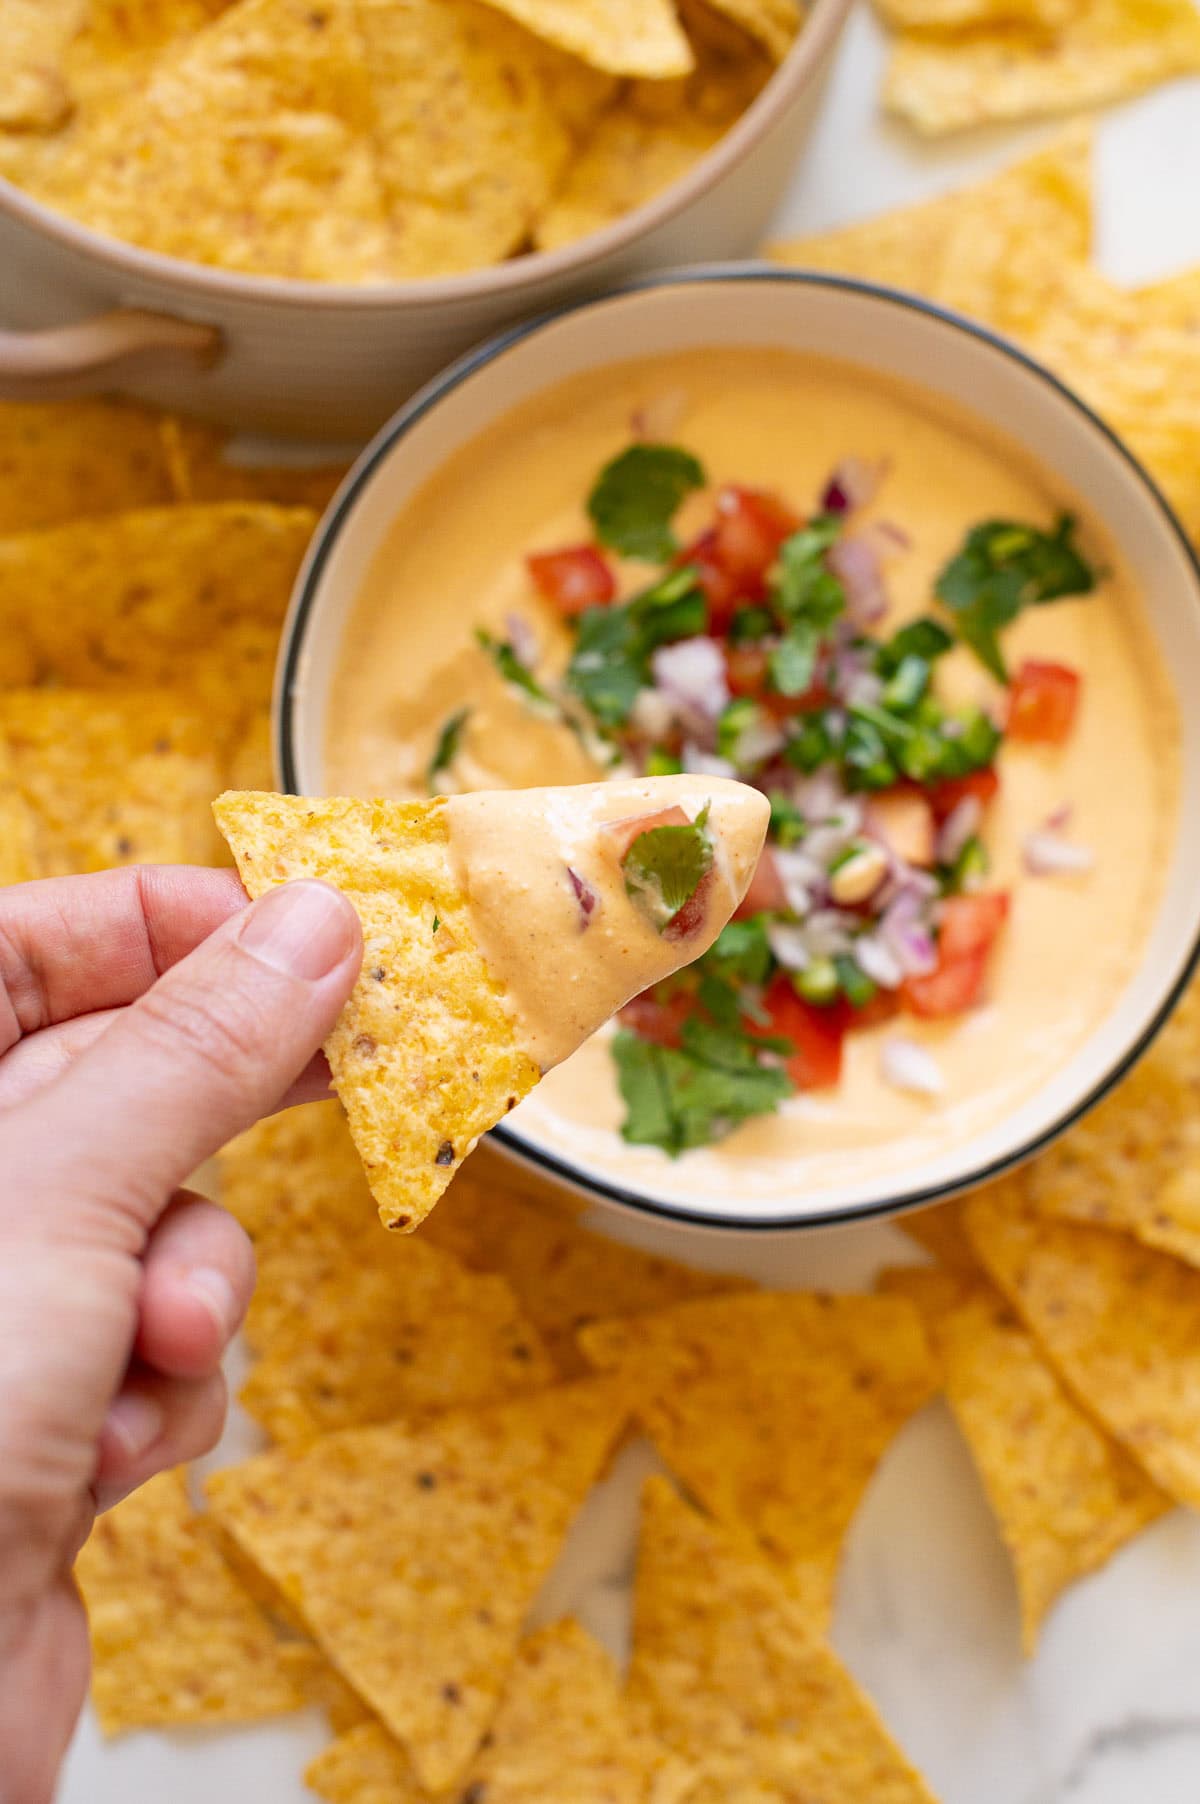 Person holding a chip dipped into a queso dip.